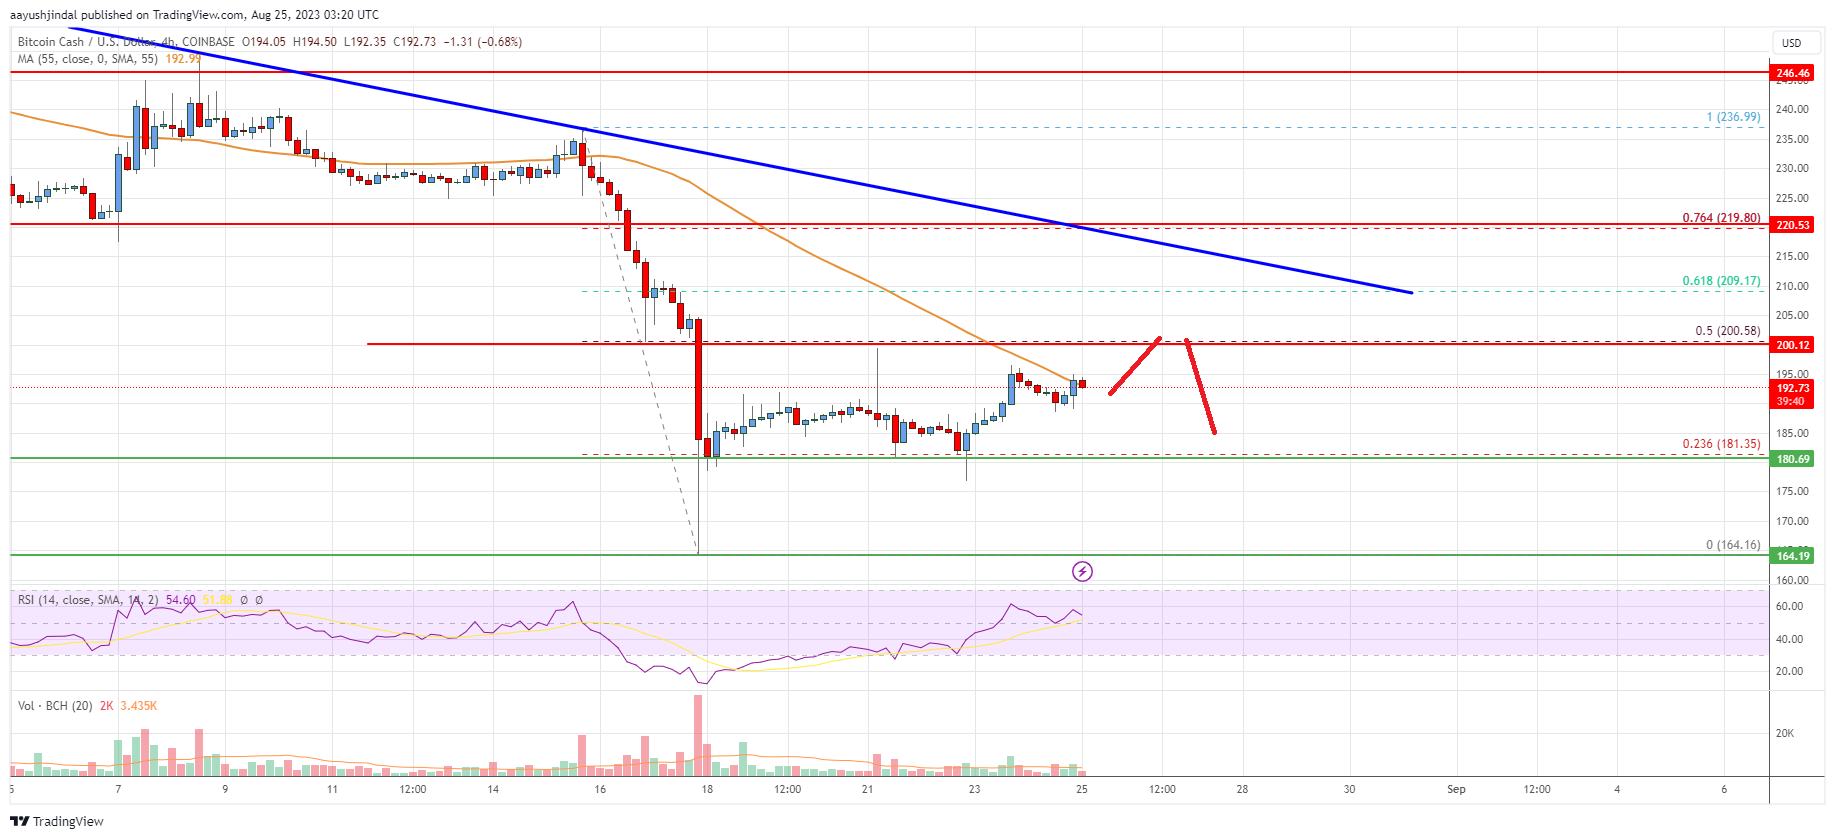 Bitcoin Cash Analysis: Recovery Could Be Capped Near $210